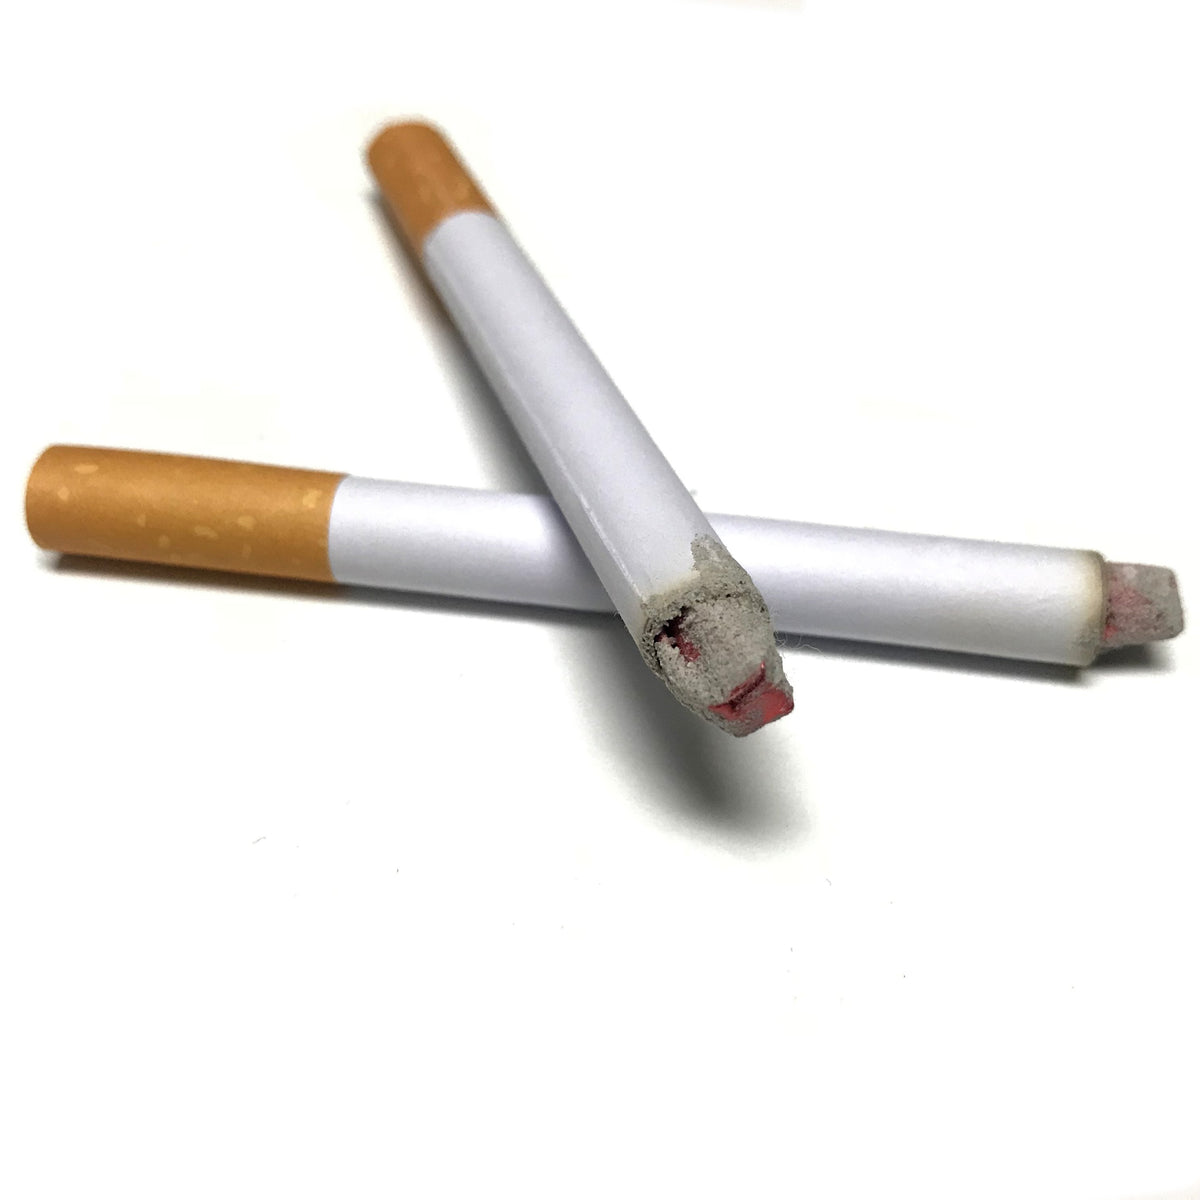 Fake Puff Puff Style Phony Cigarette with Powder Smoke Effect - 2 Pack —